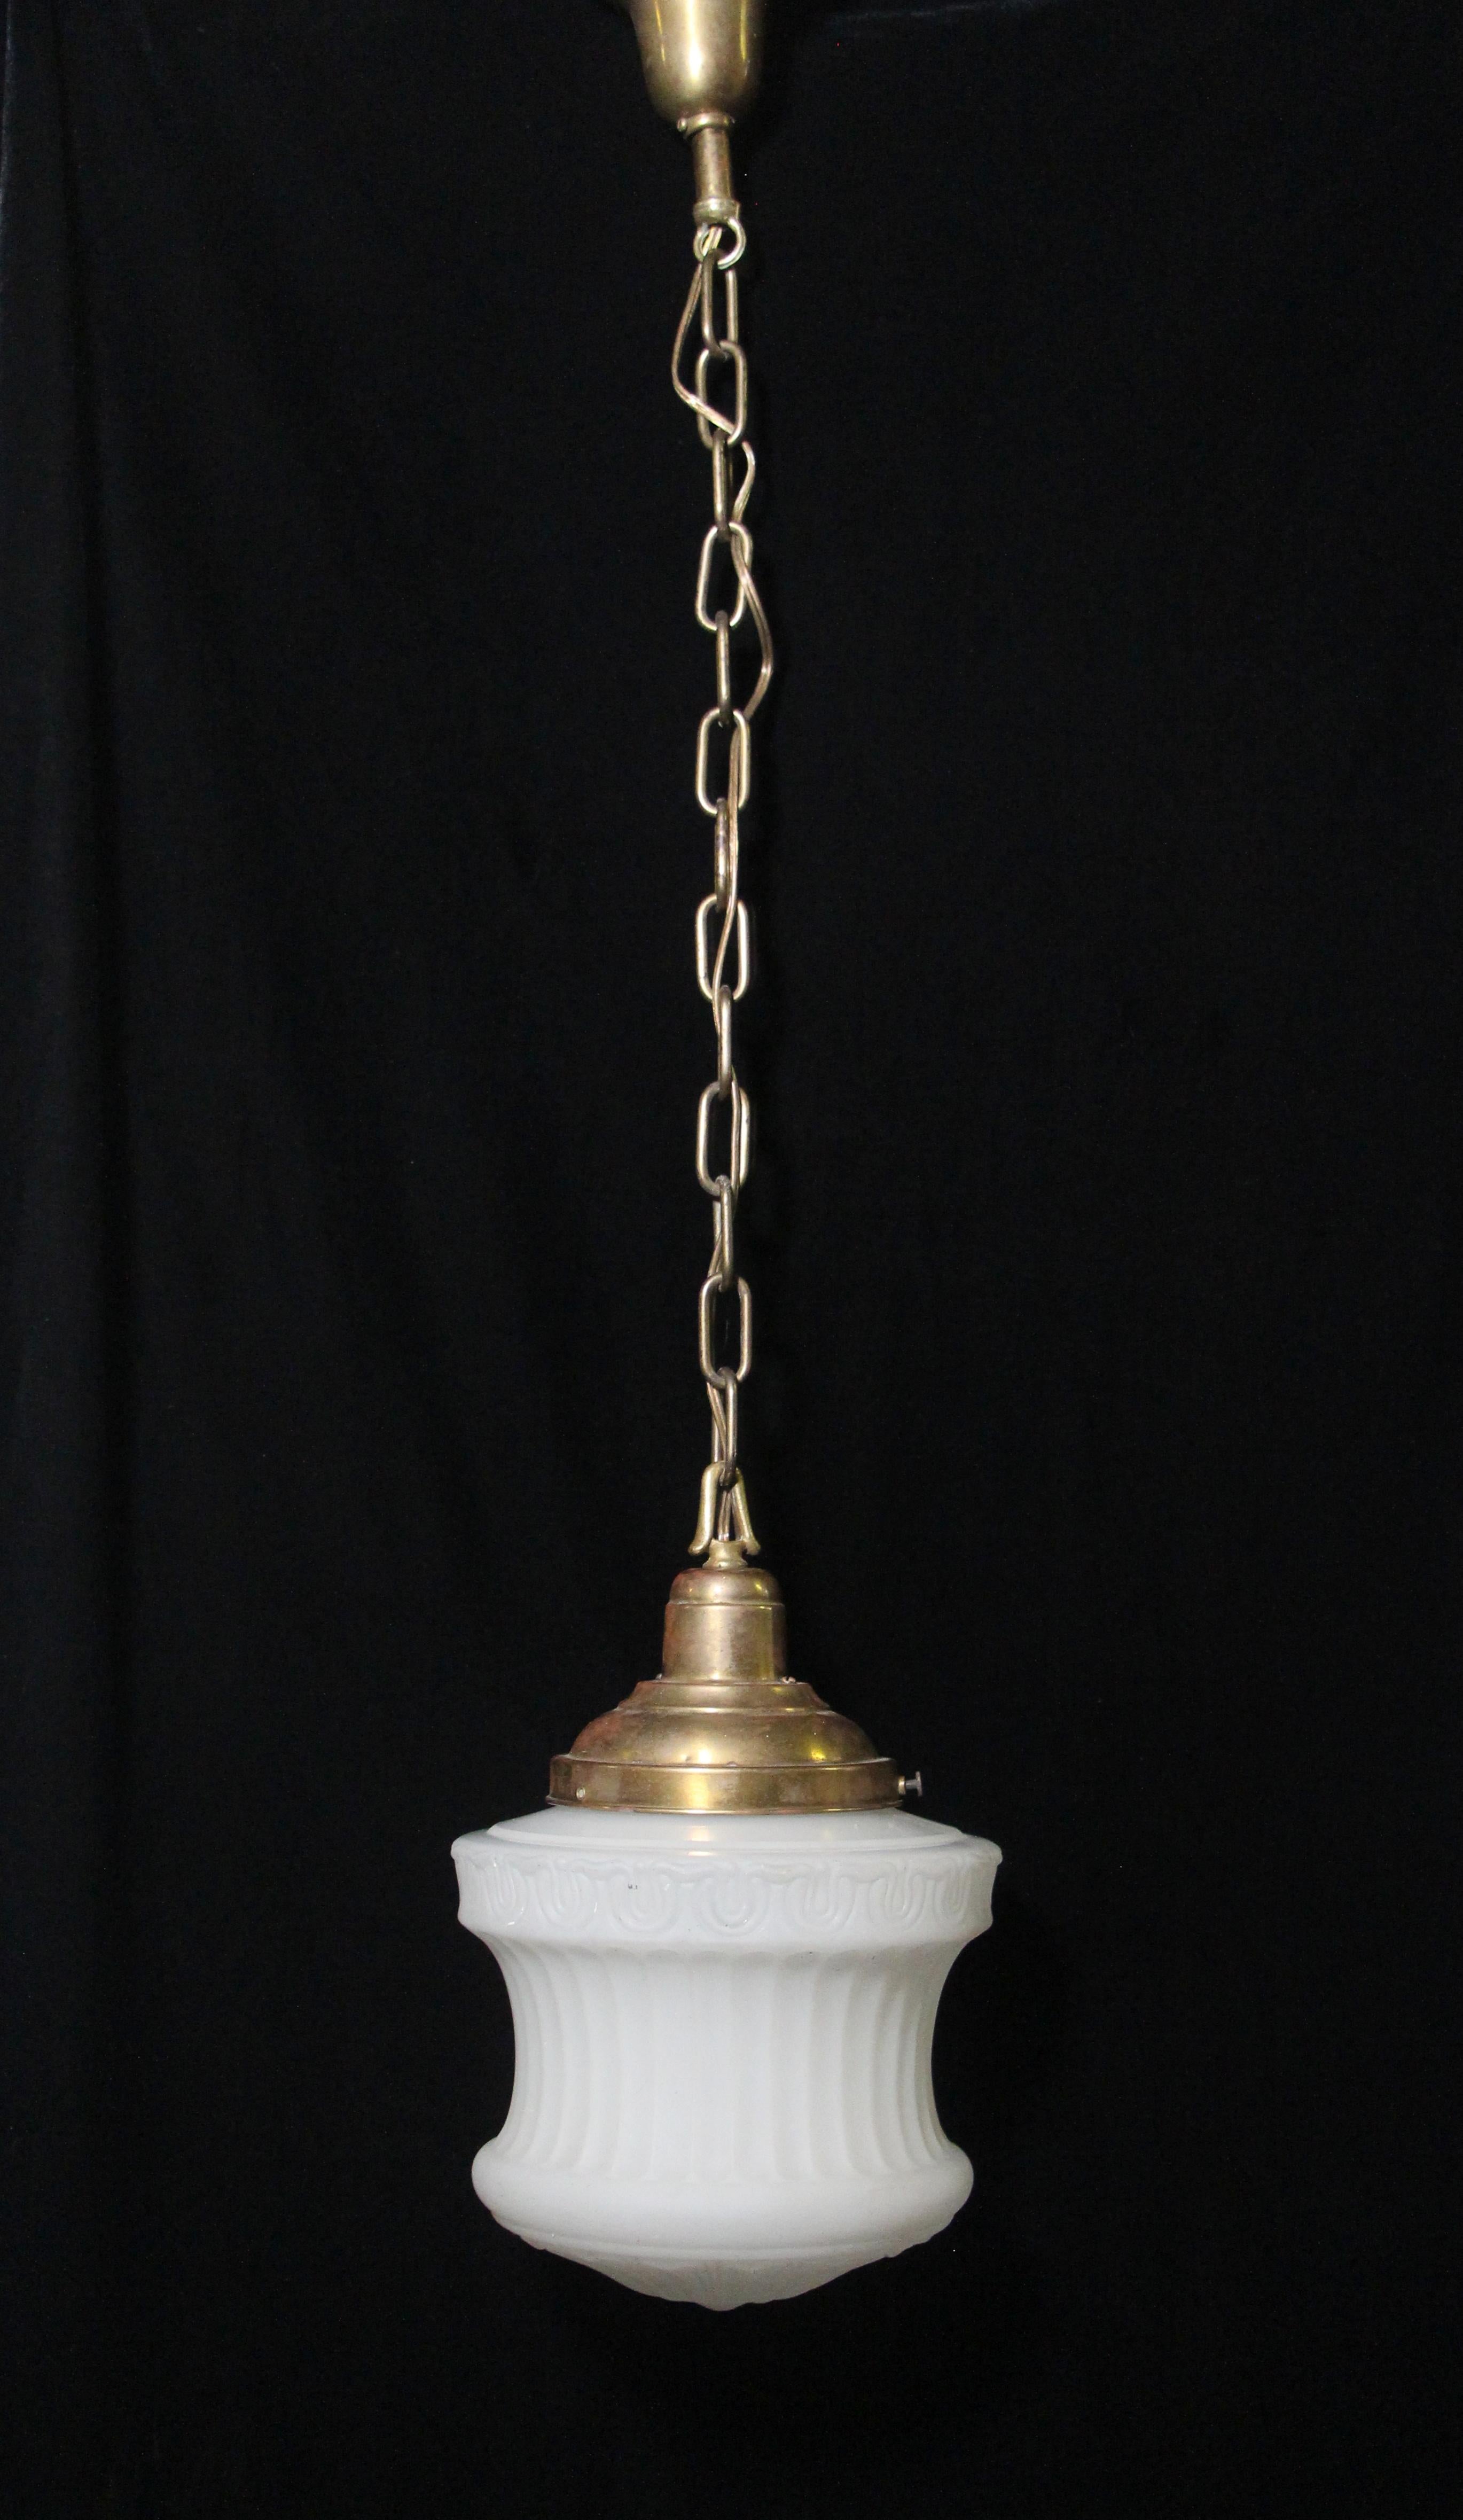 Antique 1910s cast glass pendant light with ornate Victorian detailing and fluting. Features new brass hardware and new wiring. The globe has some minor removable stains, which can be seen in the photos. Price includes cleaning and restoration. This